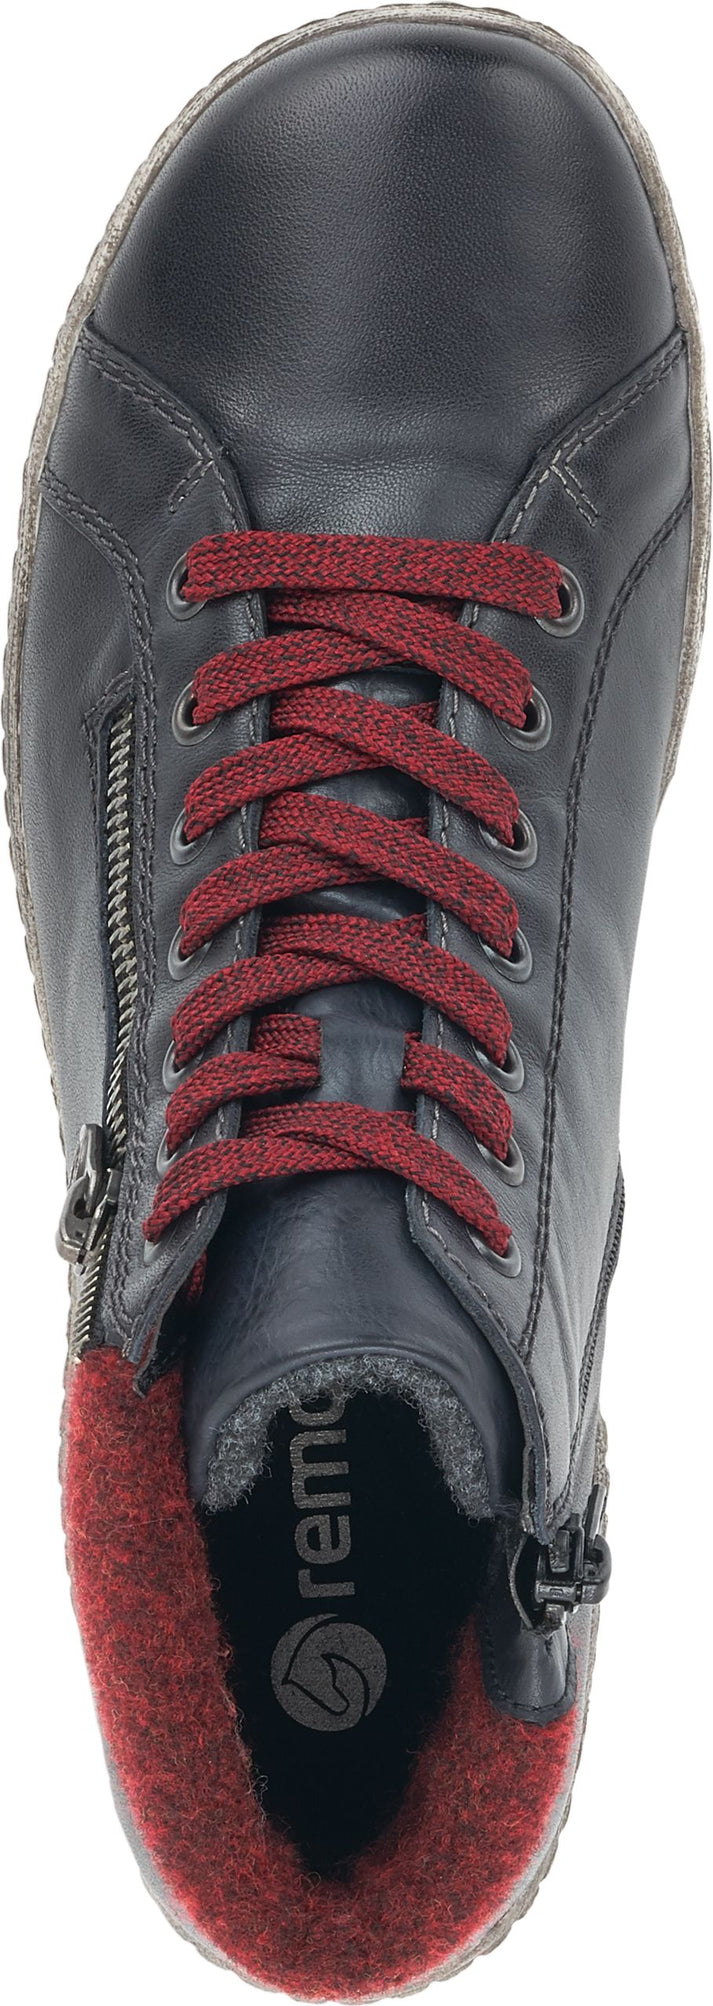 Remonte Boots Navy/red Lace Up Boot